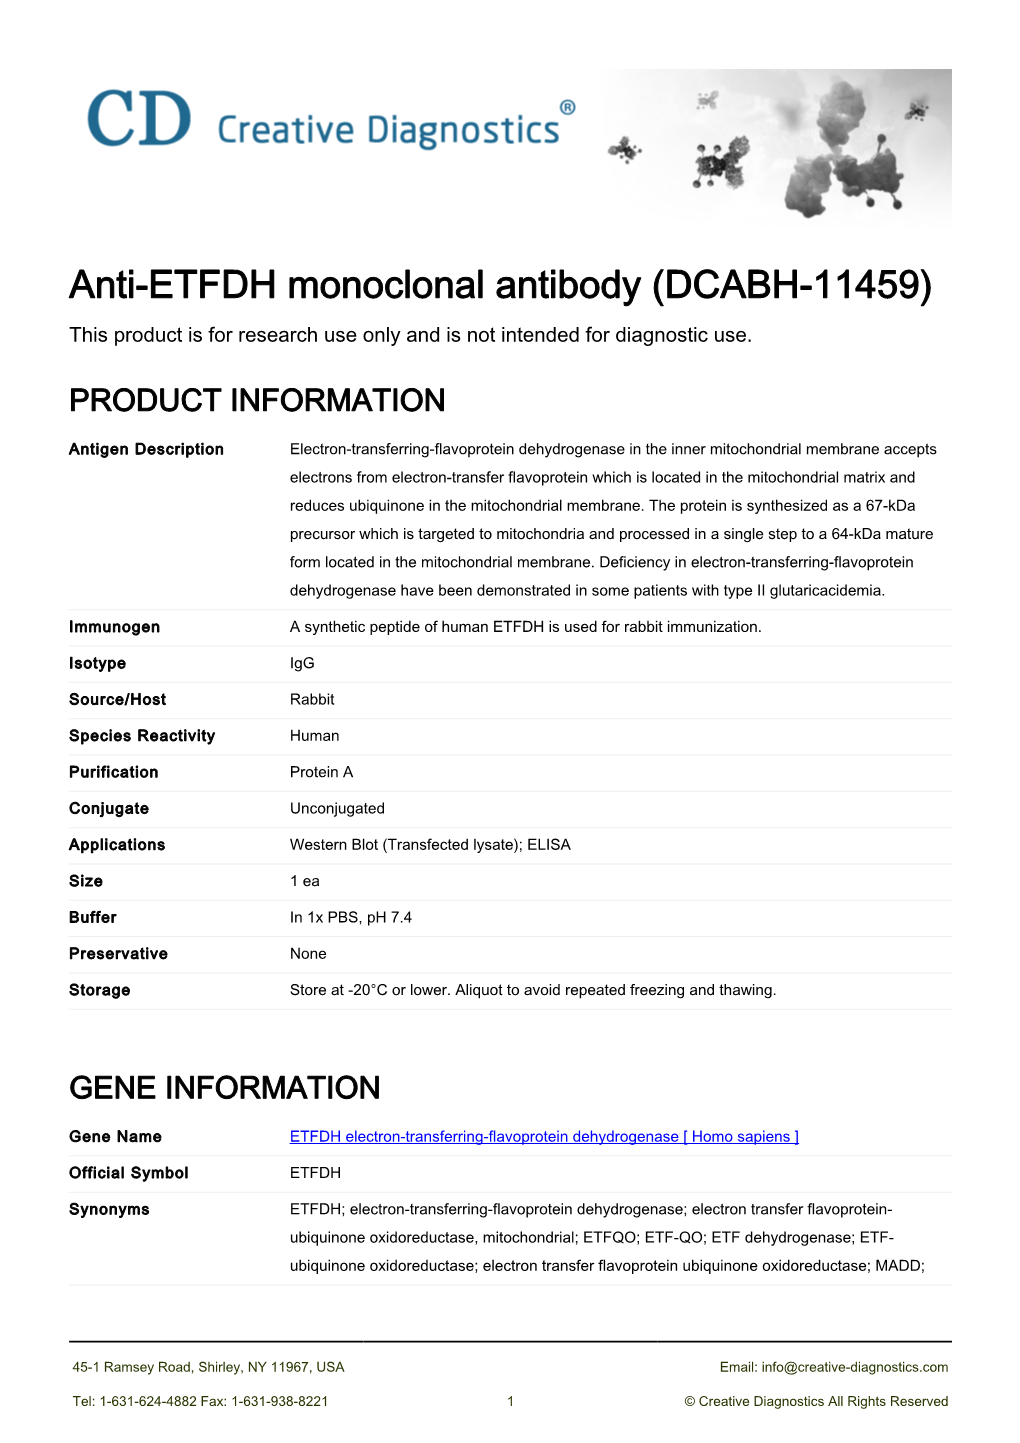 Anti-ETFDH Monoclonal Antibody (DCABH-11459) This Product Is for Research Use Only and Is Not Intended for Diagnostic Use